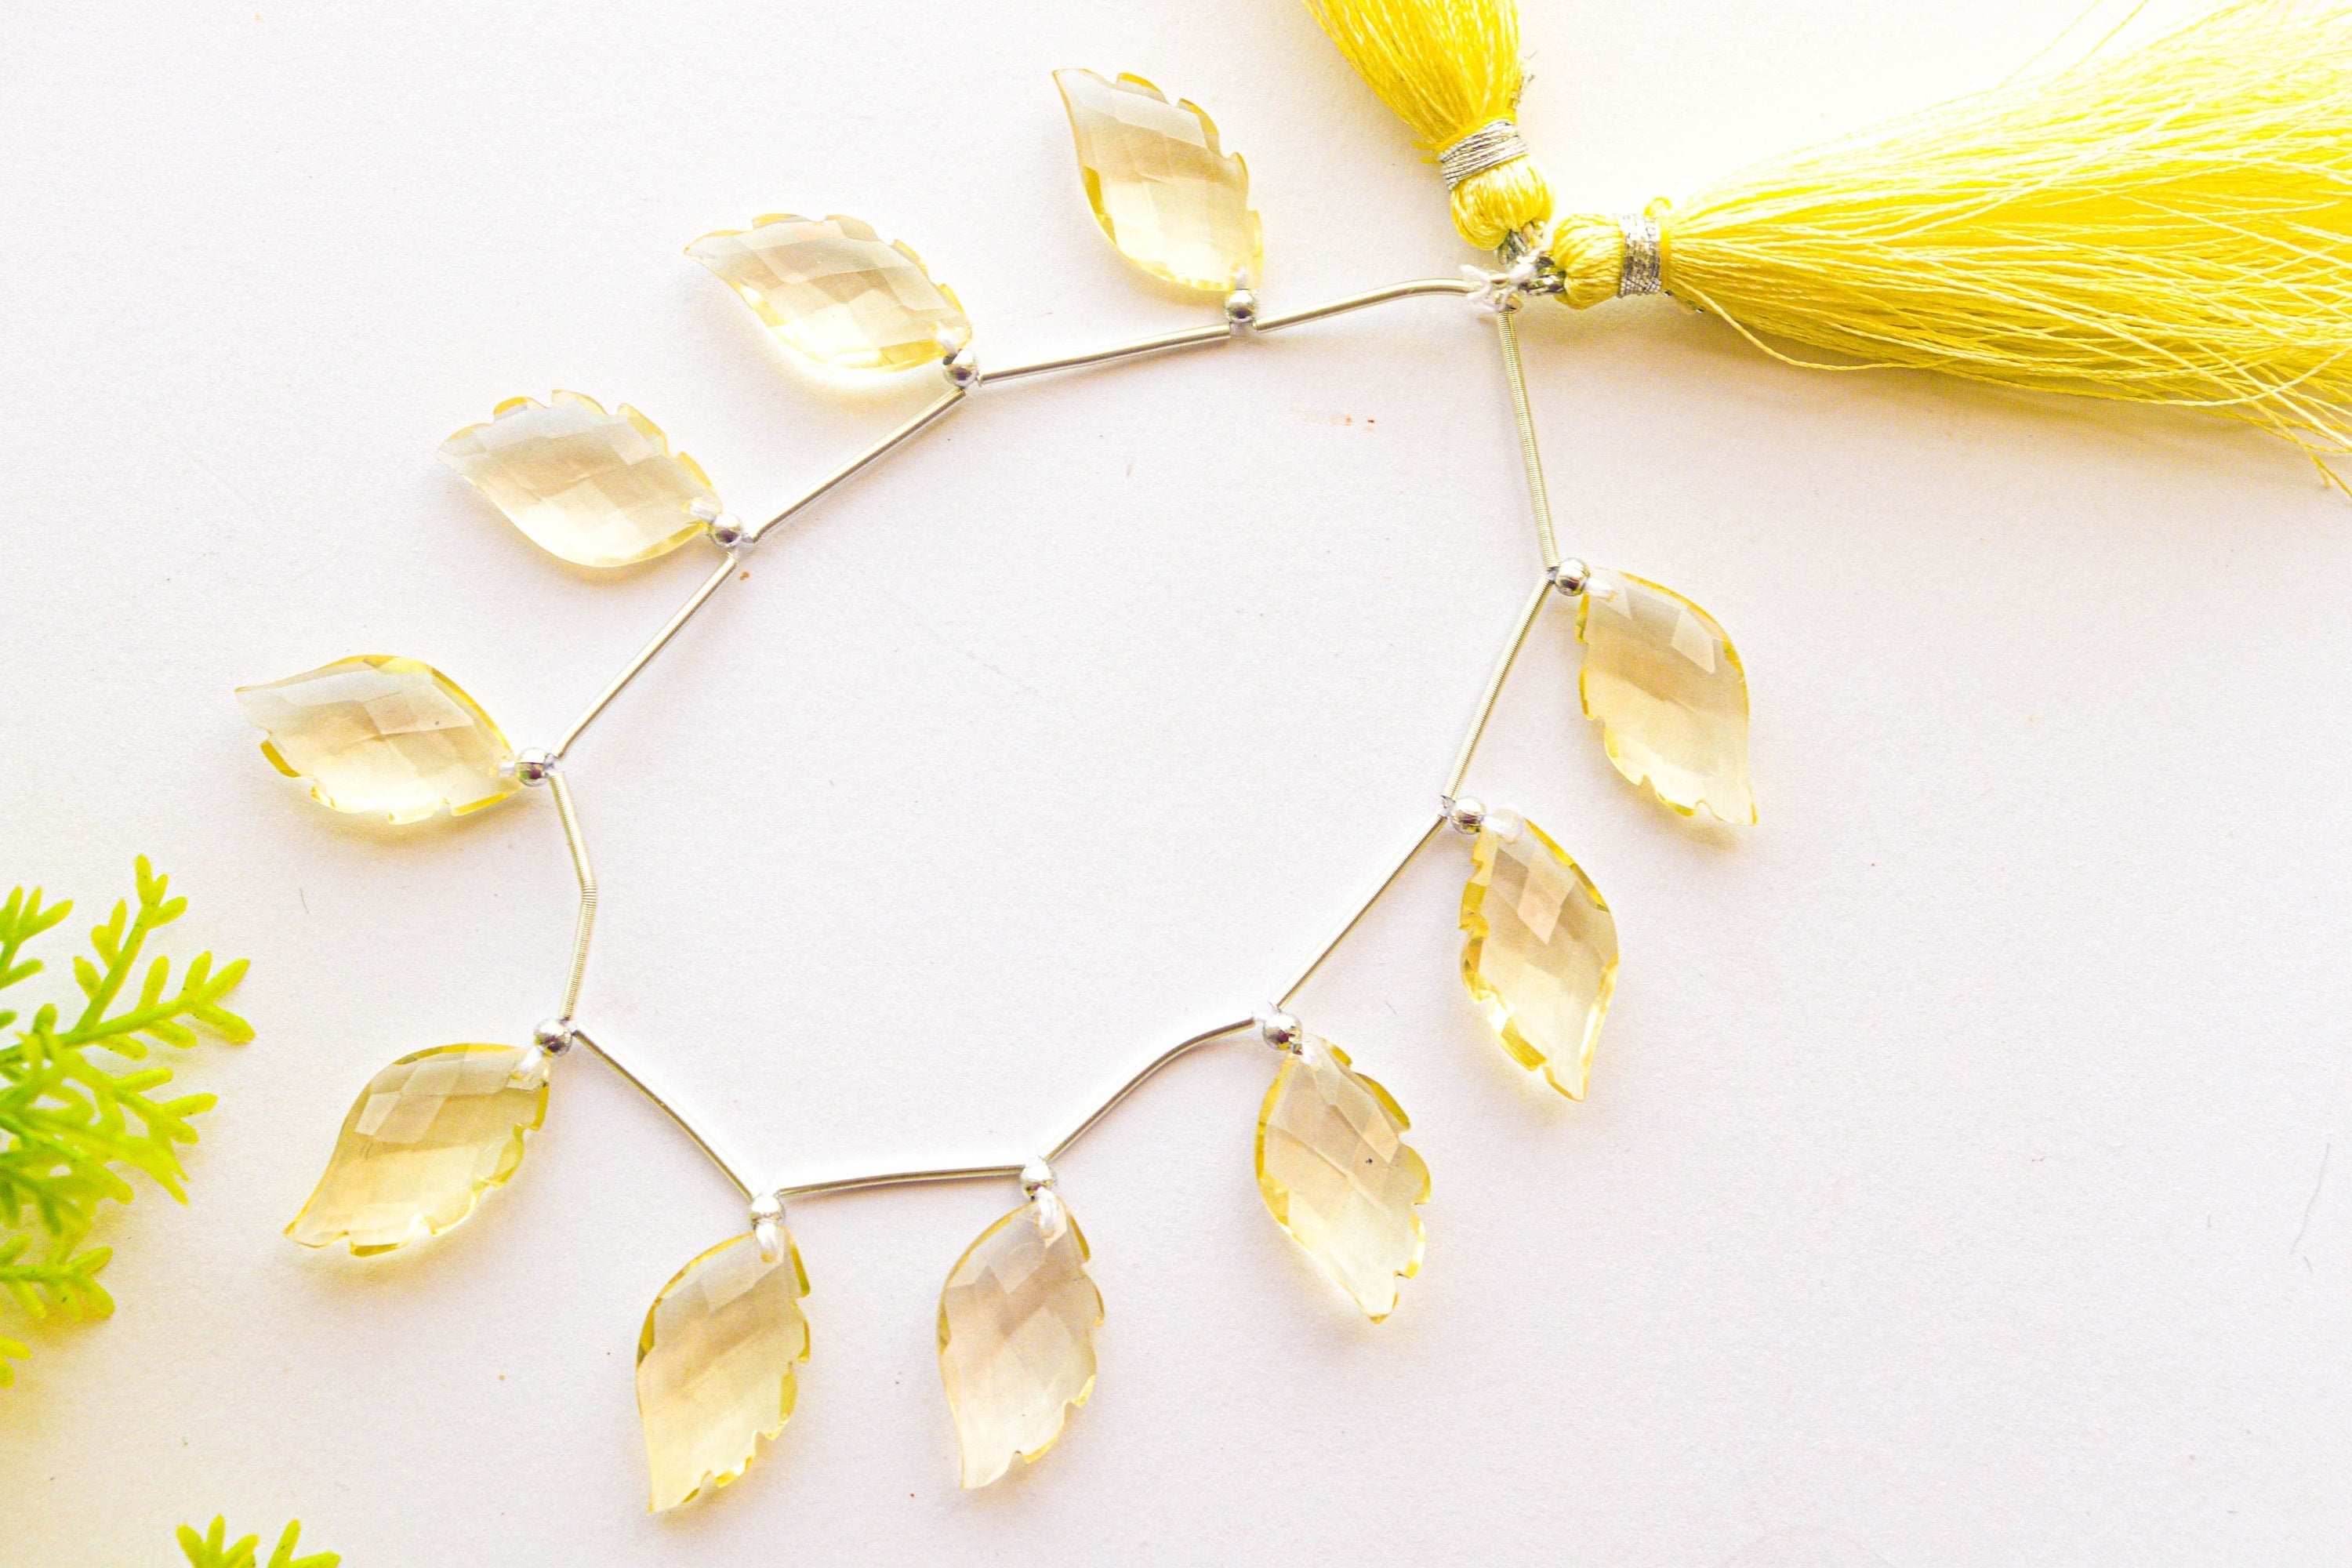 Lemon Quartz Beads Faceted Wings Shape | 10x20mm | 10 Pieces String | Natural Gemstone | Beadsforyourjewellery Beadsforyourjewelry